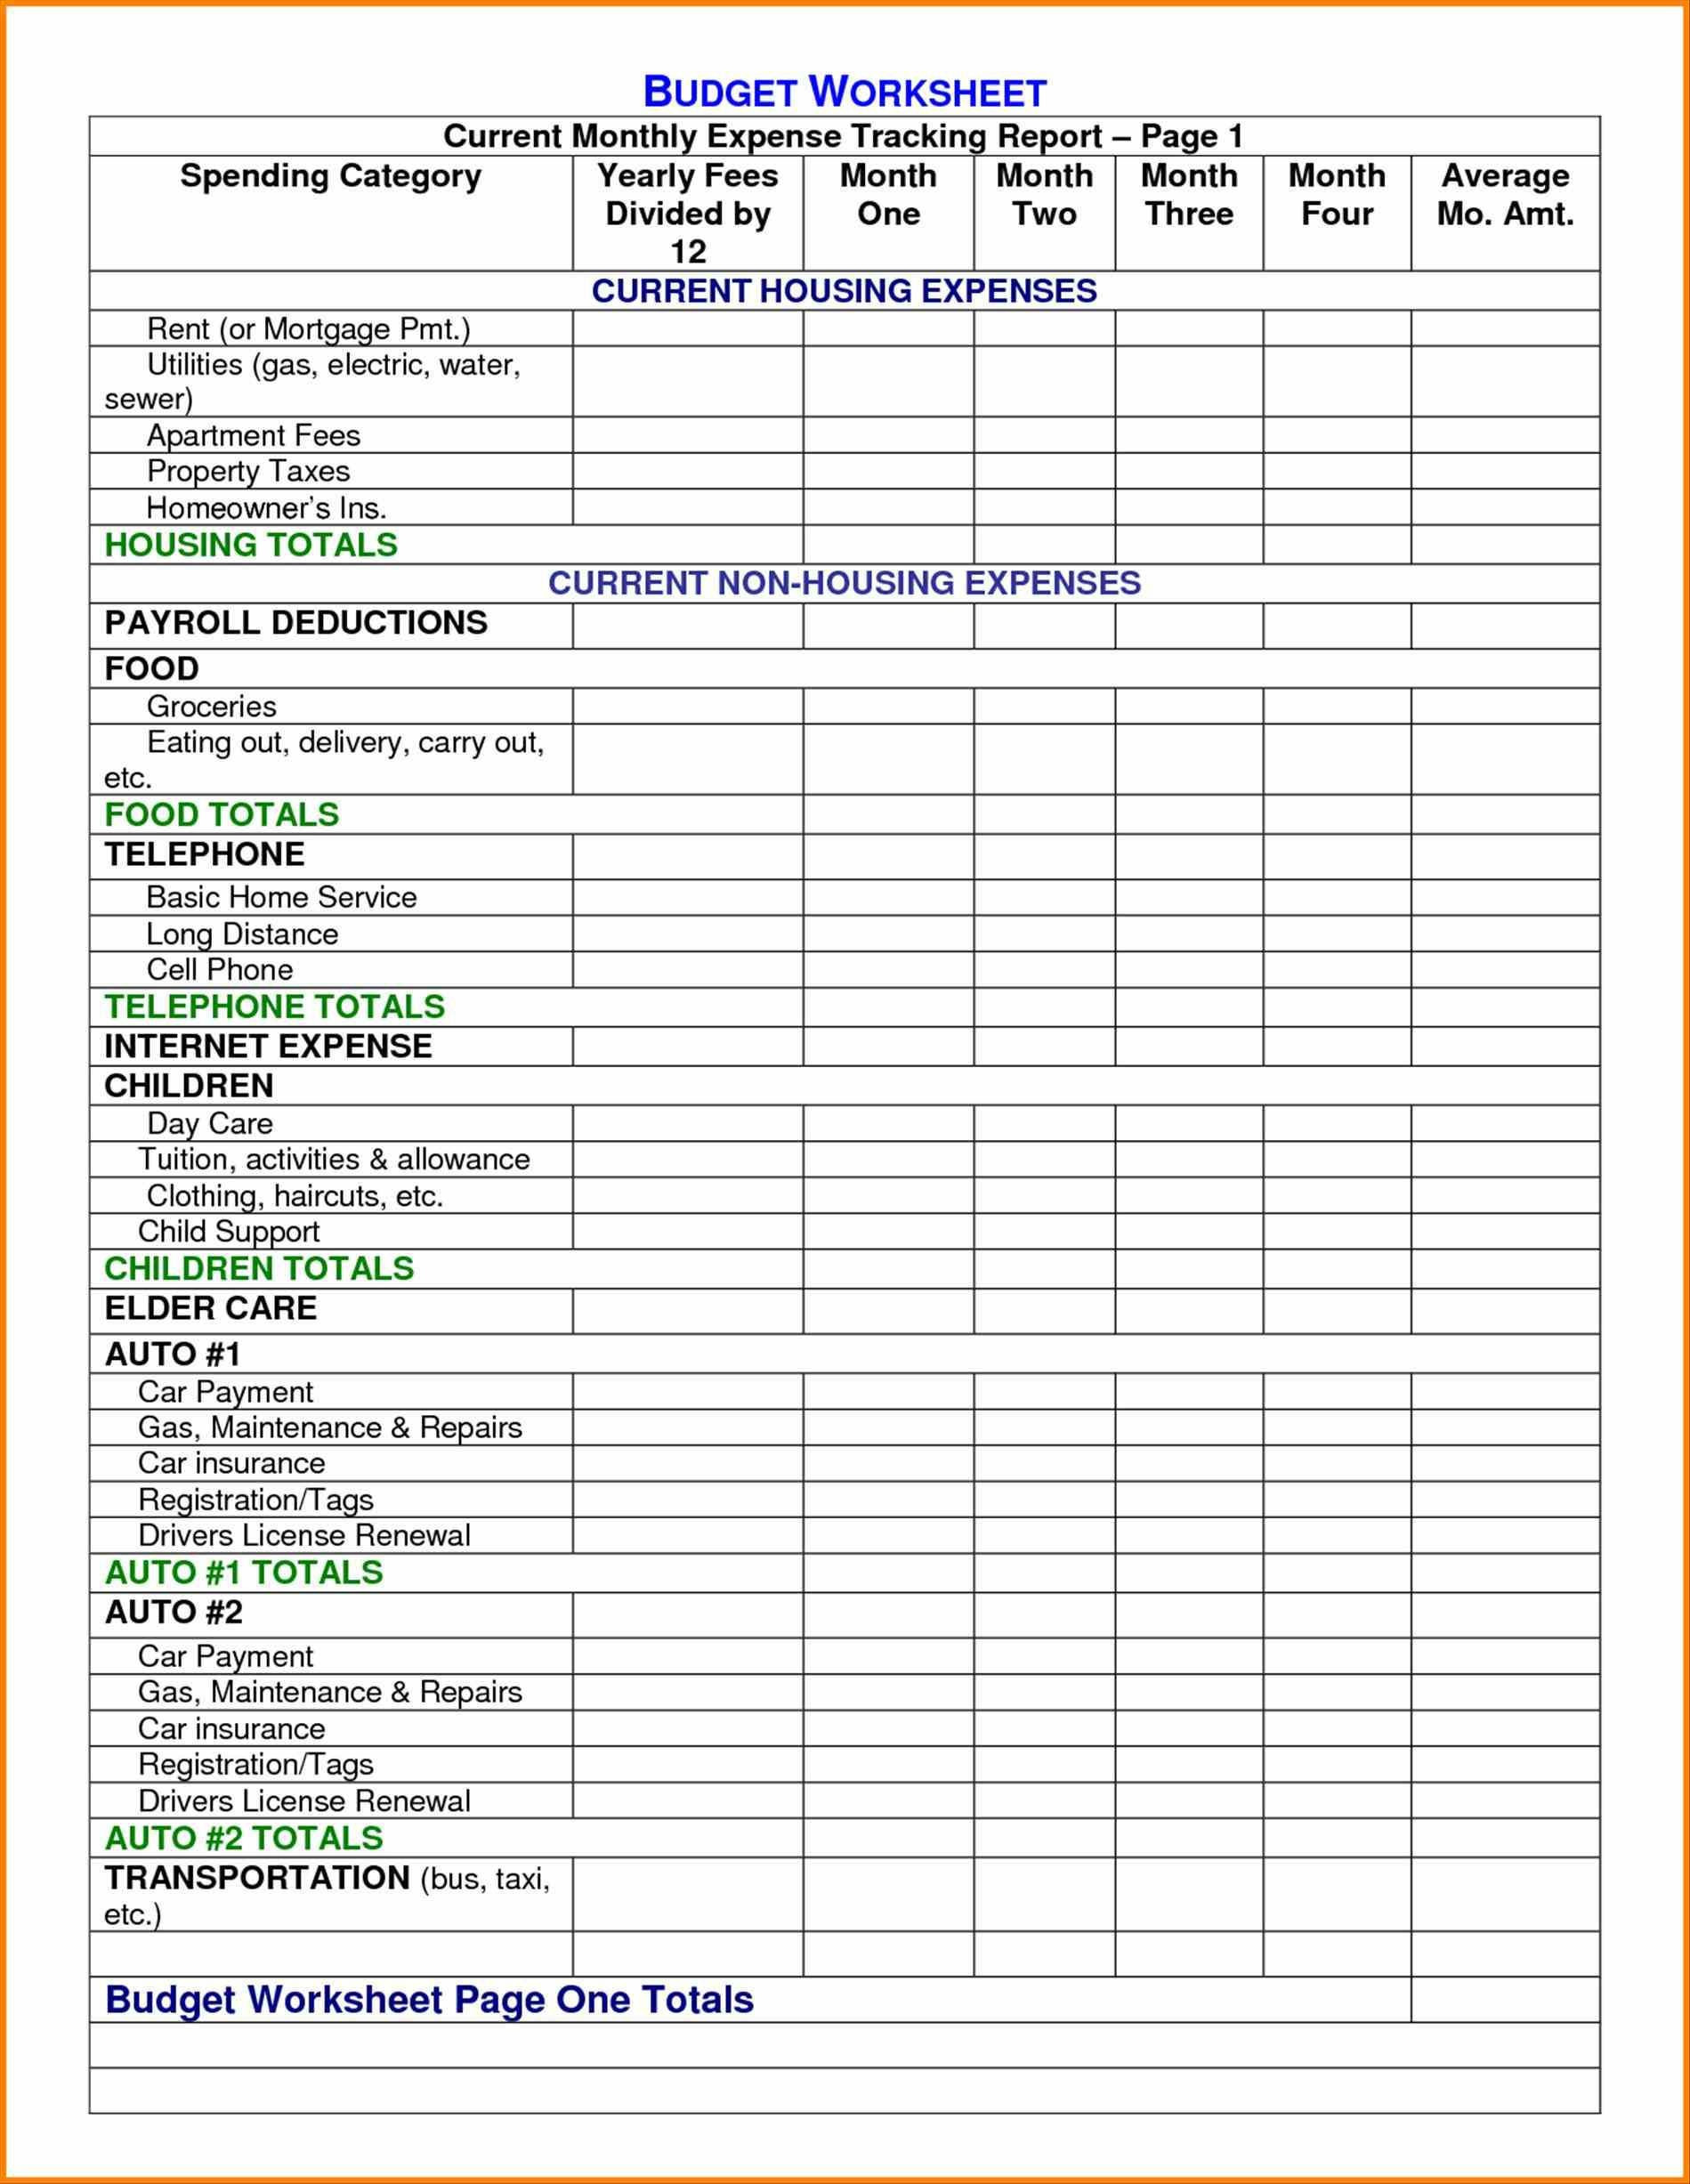 Lawn Care Business Plan Template Free